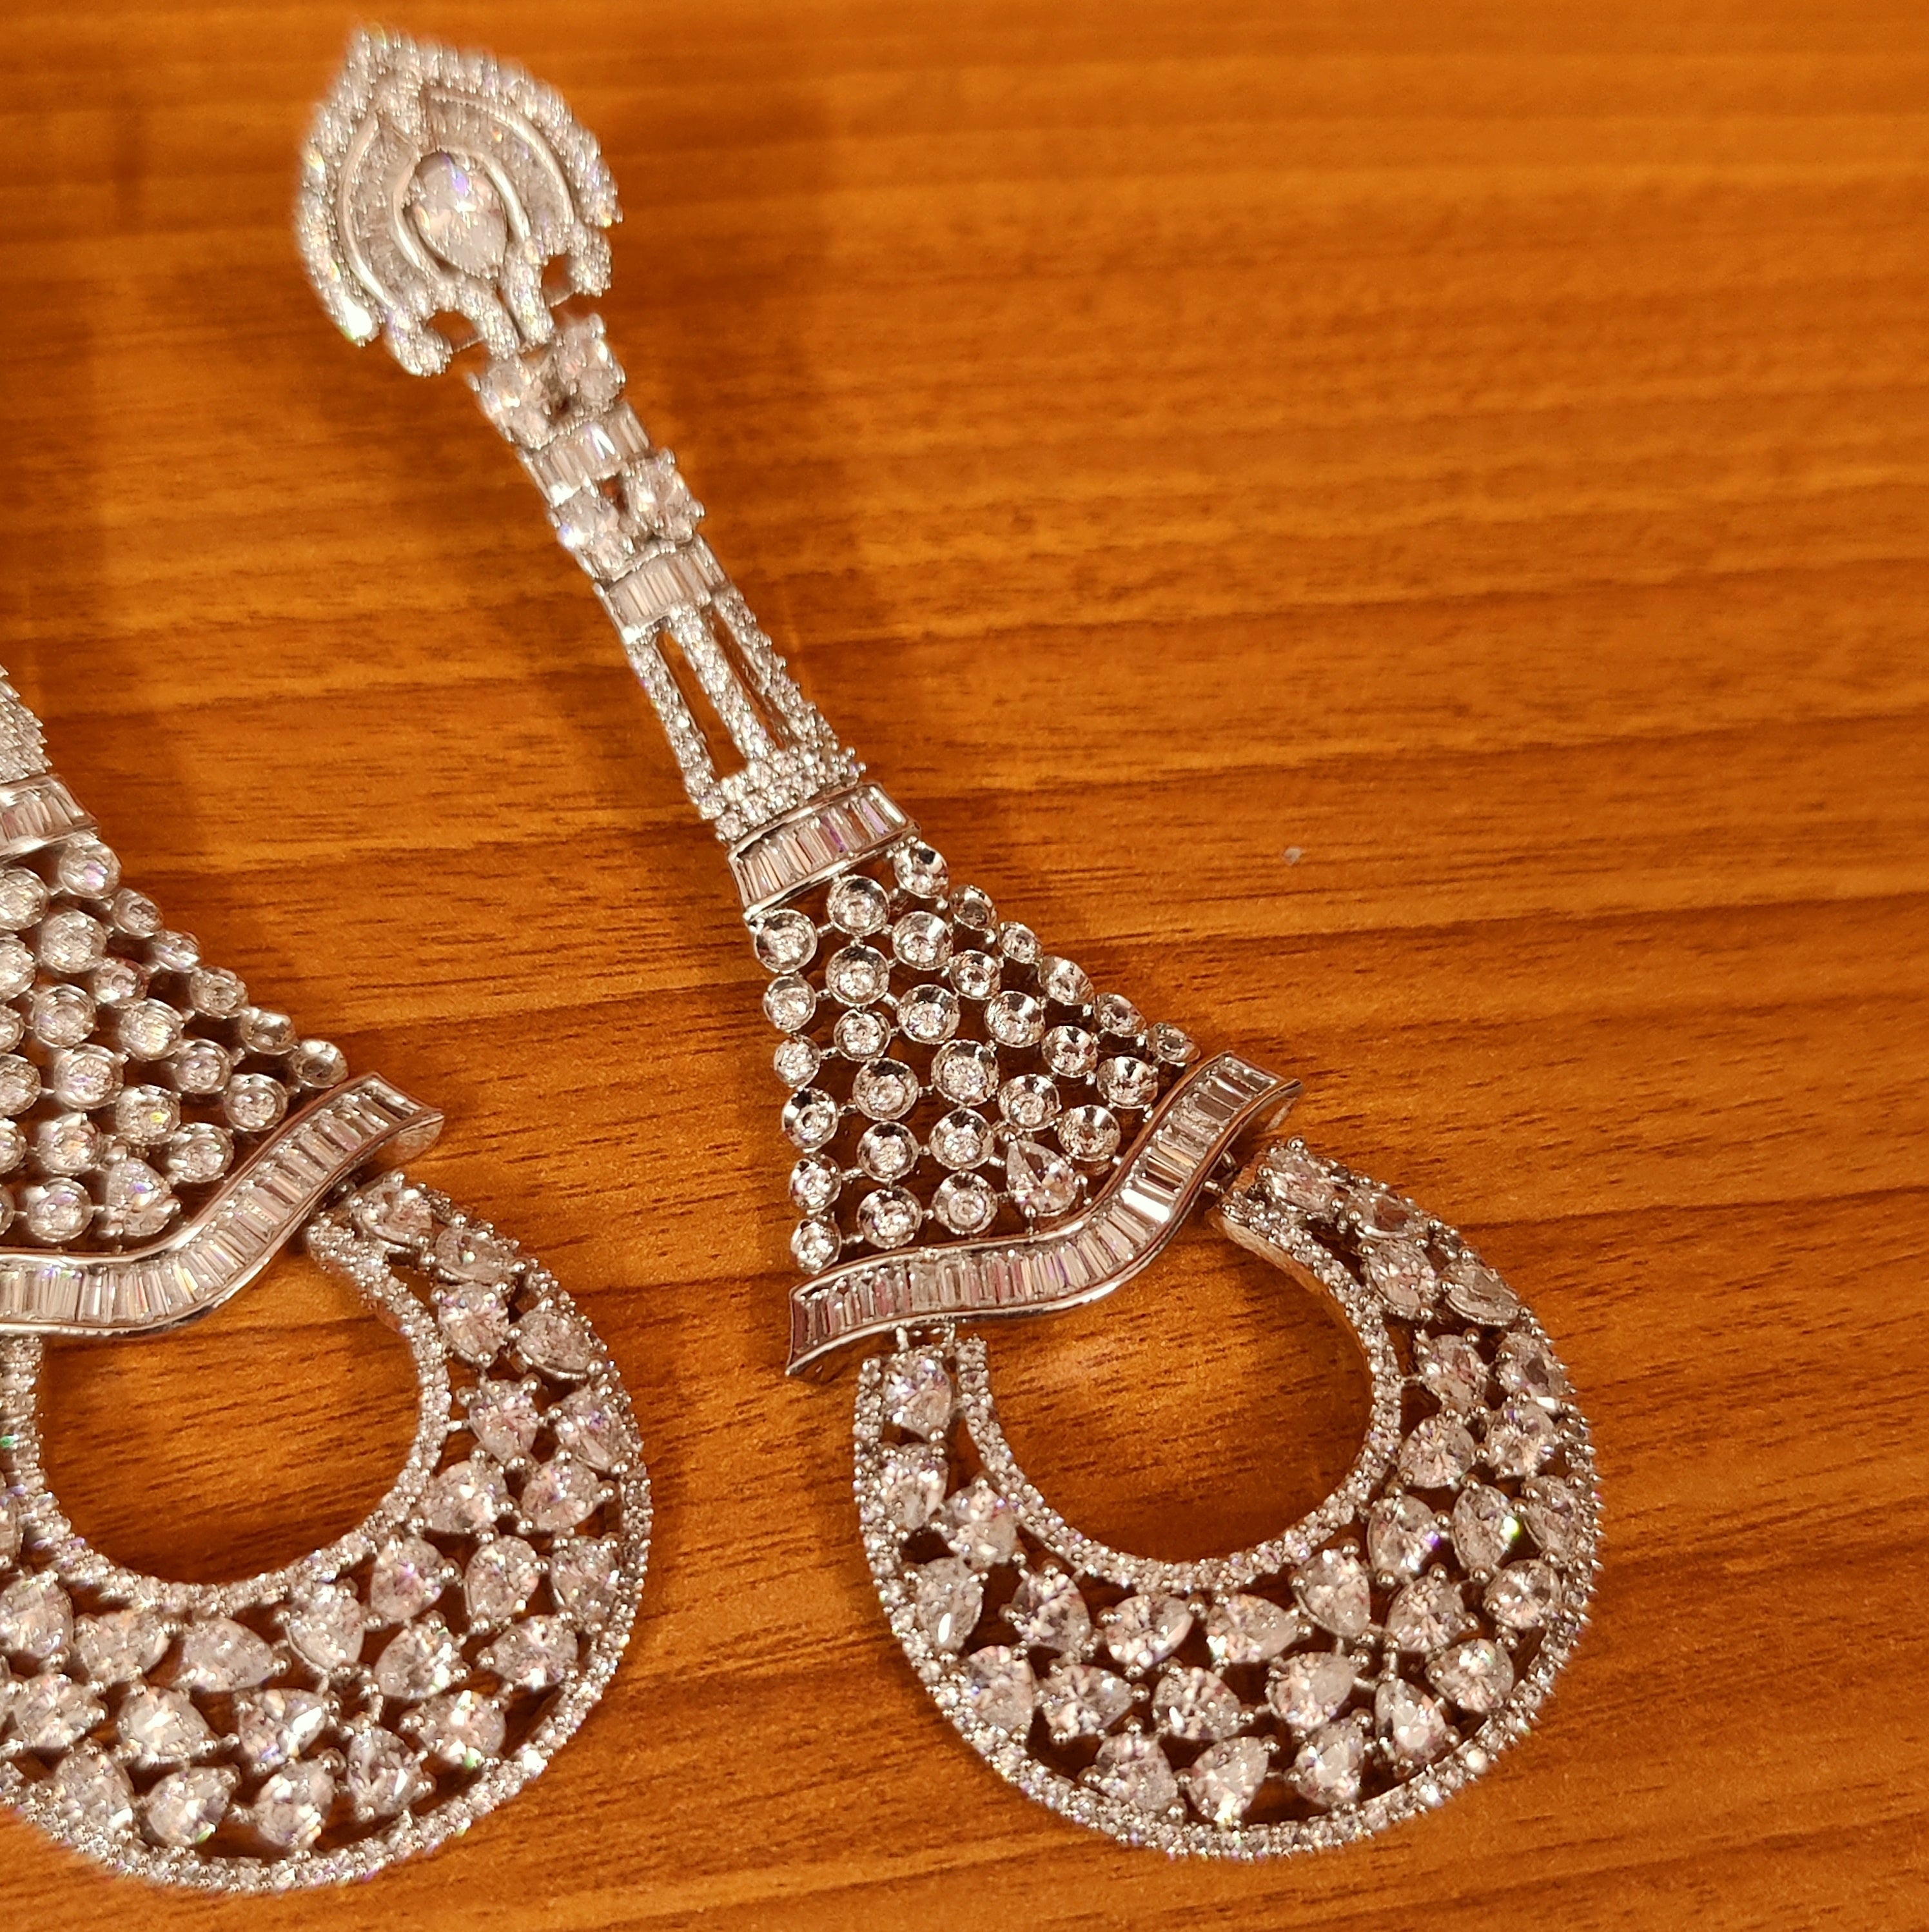 Naaz Diamond and Gold Indian Earrings – Timeless Indian Jewelry | Aurus